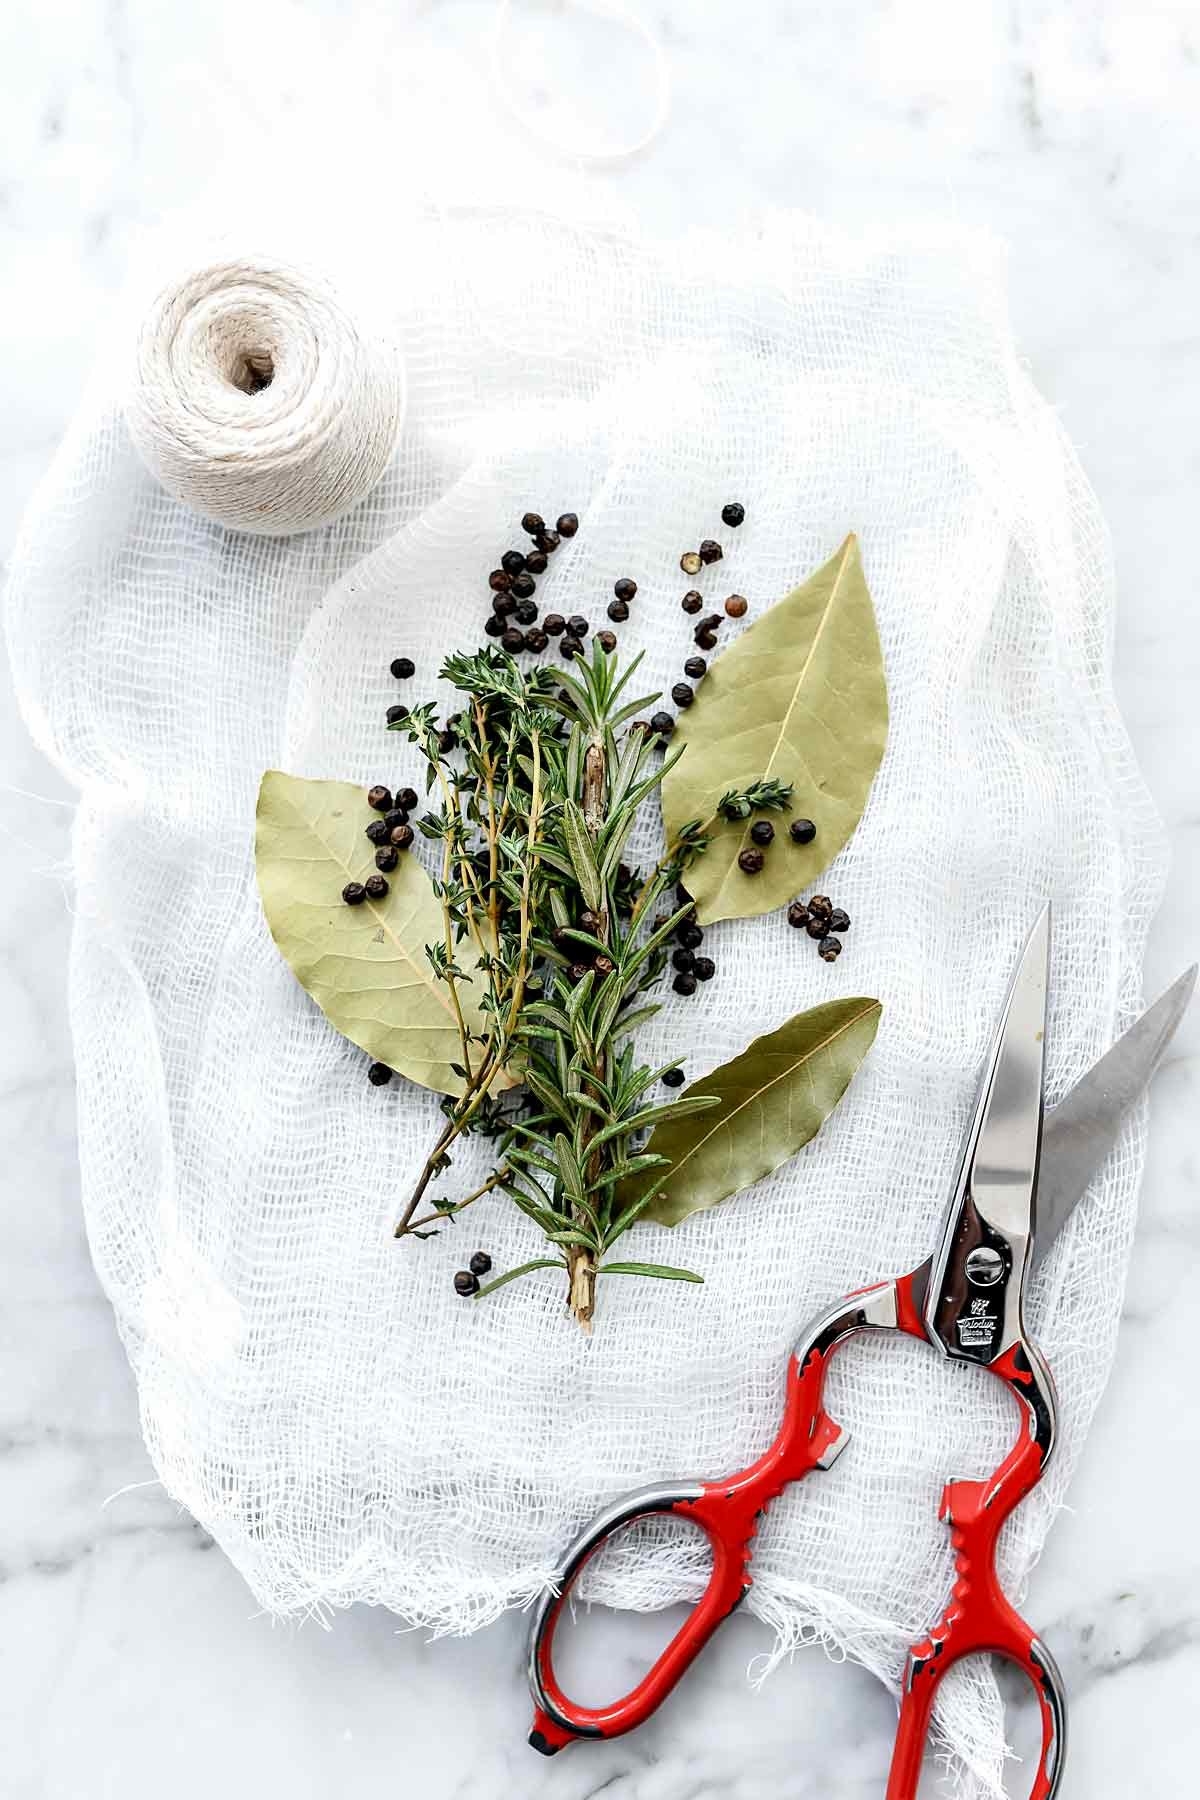 Making a herb packet in cheesecloth.